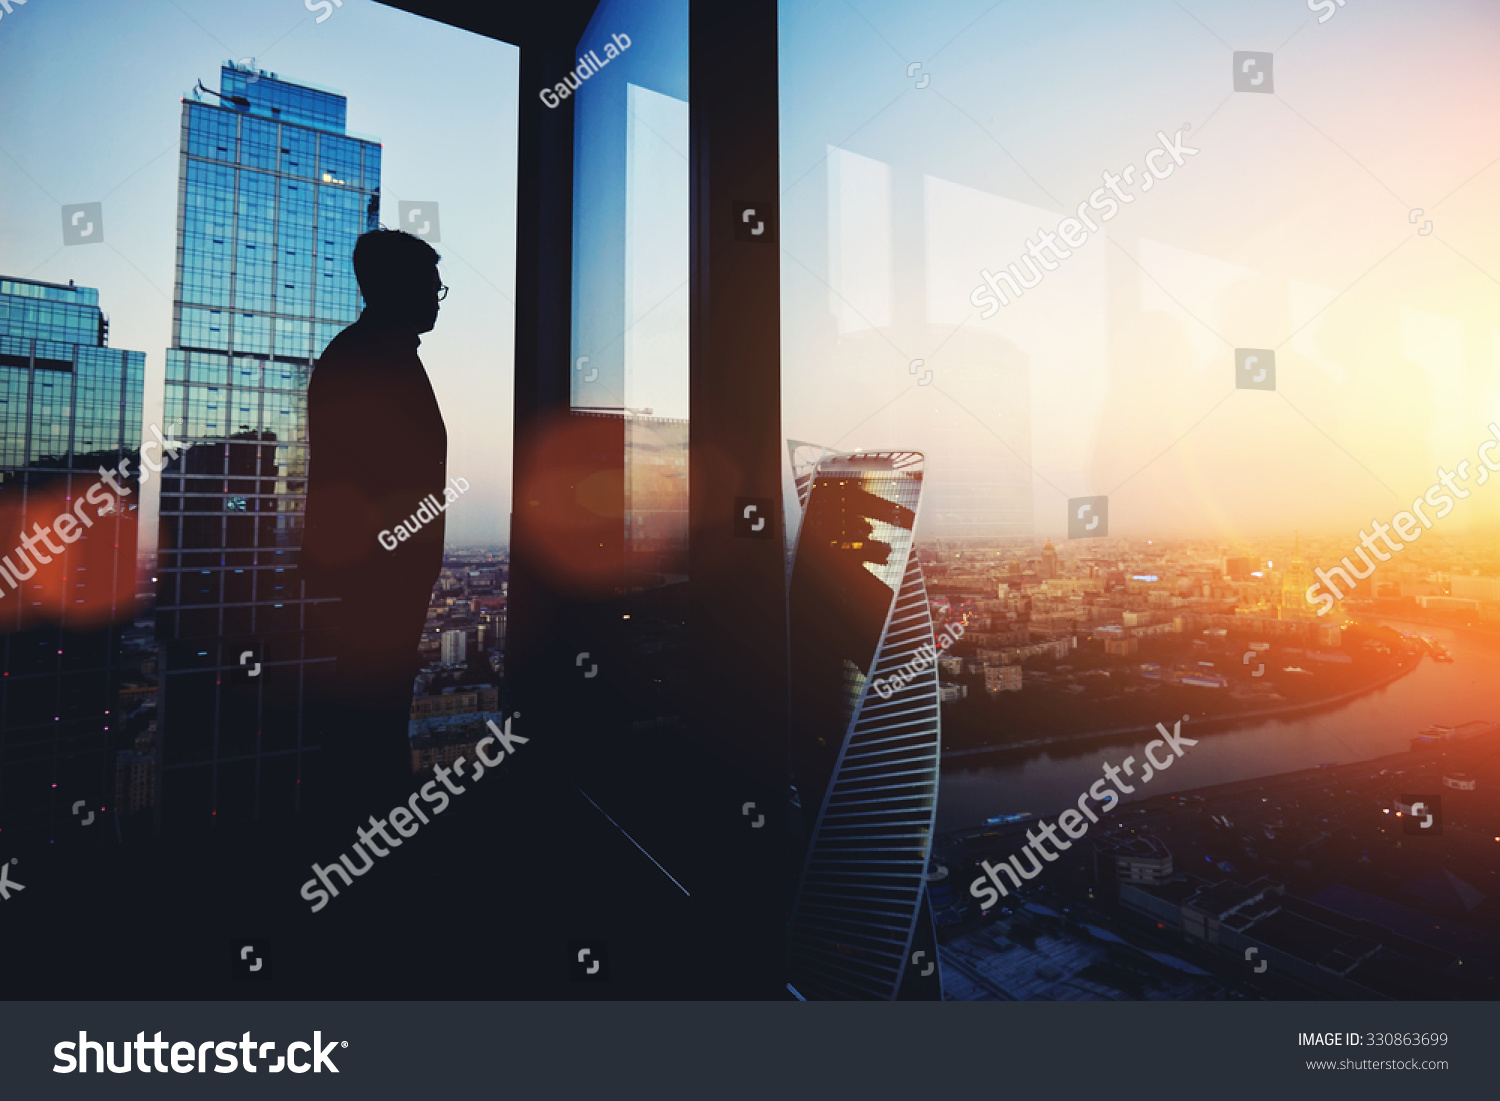 Silhouette of young intelligent man managing director resting after late business meeting while standing near big office window background with copy space for your text message or promotional content #330863699